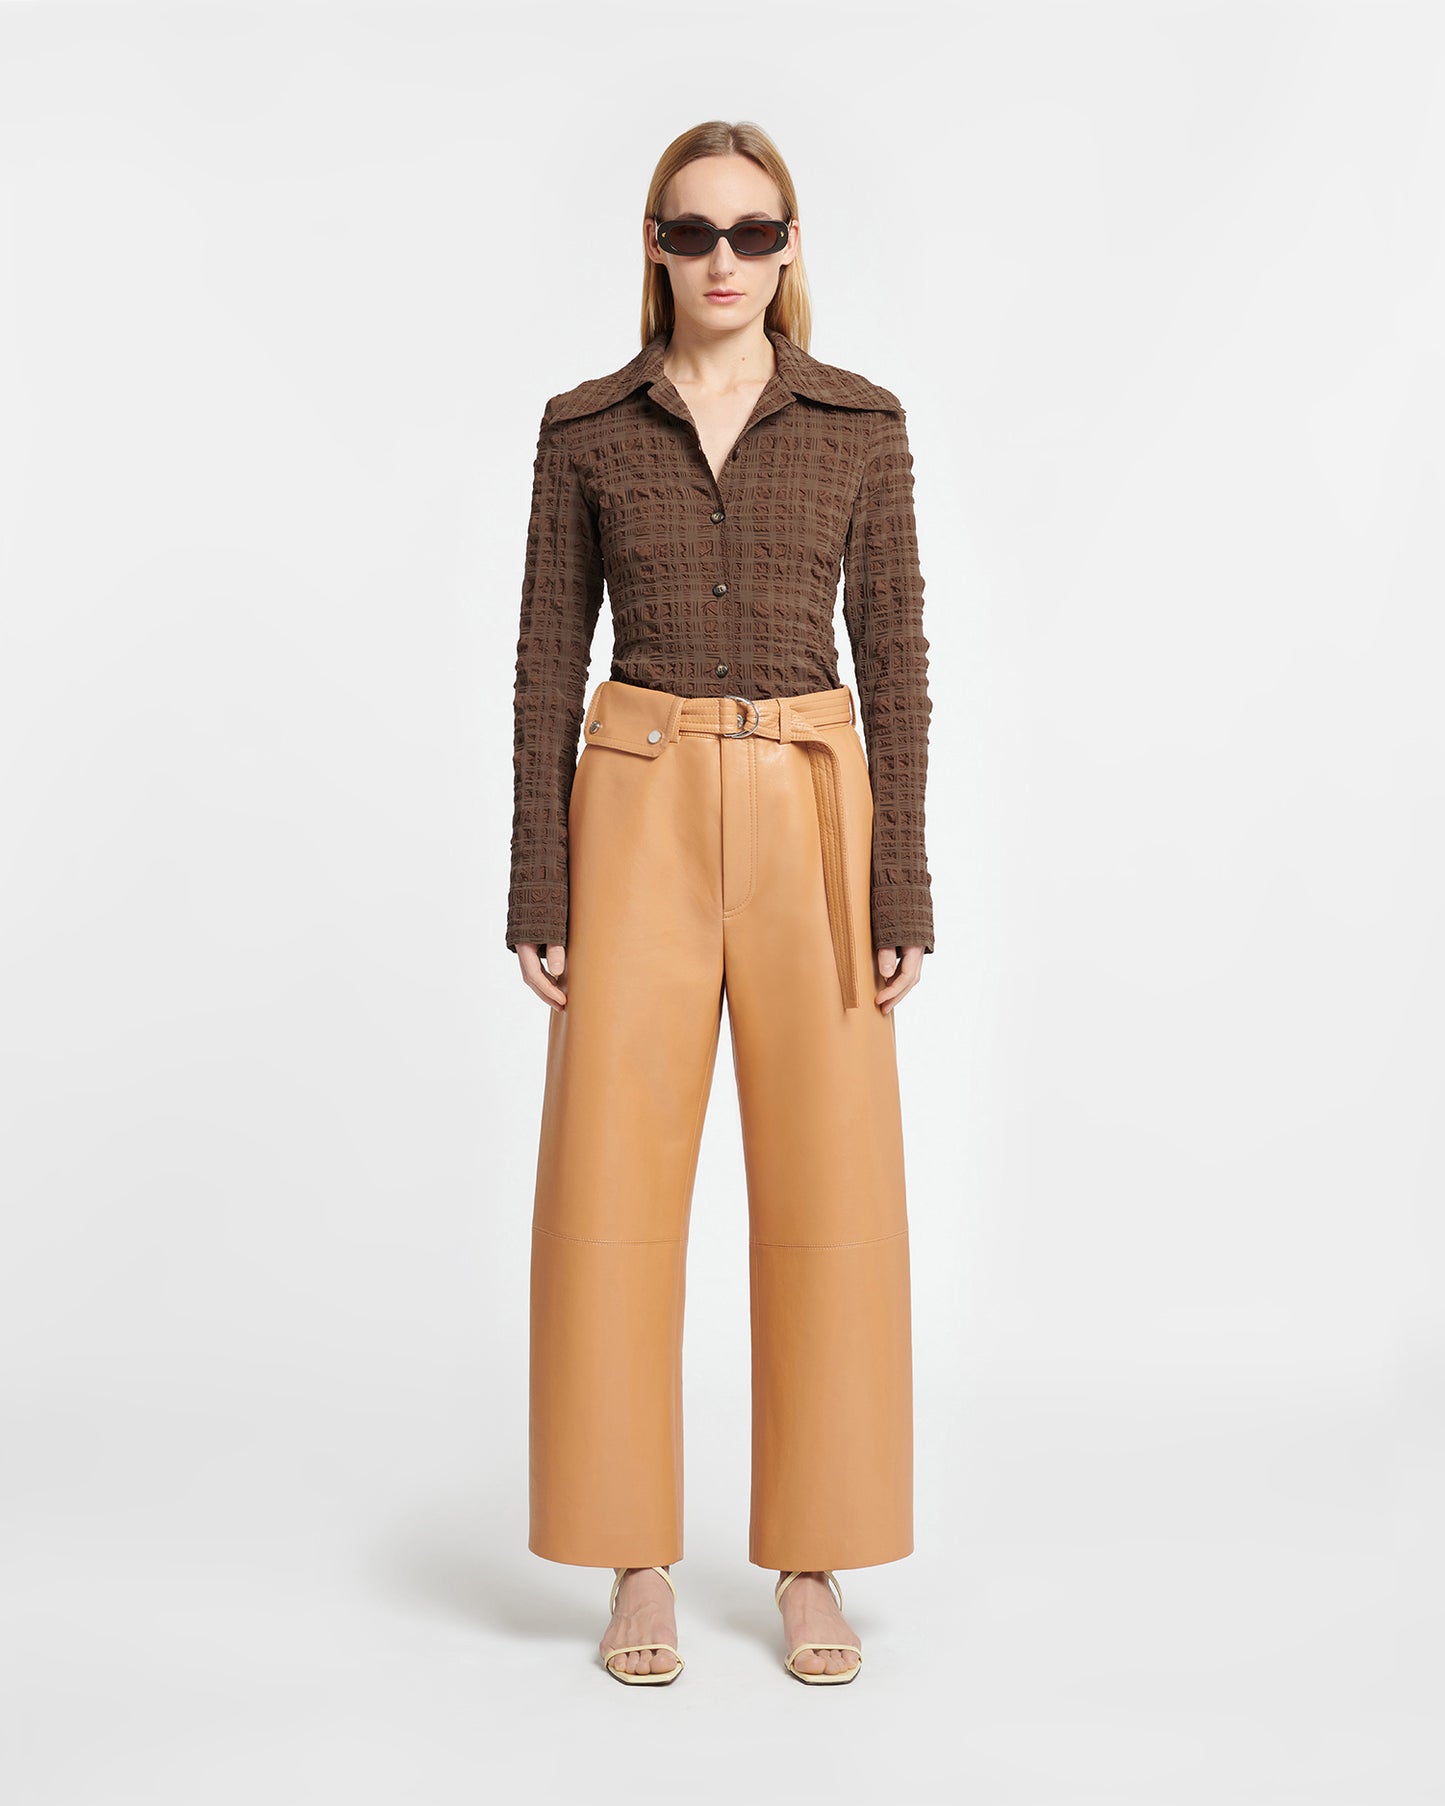 Sanna - Belted Regenerated Leather Pants - Tan Apricot